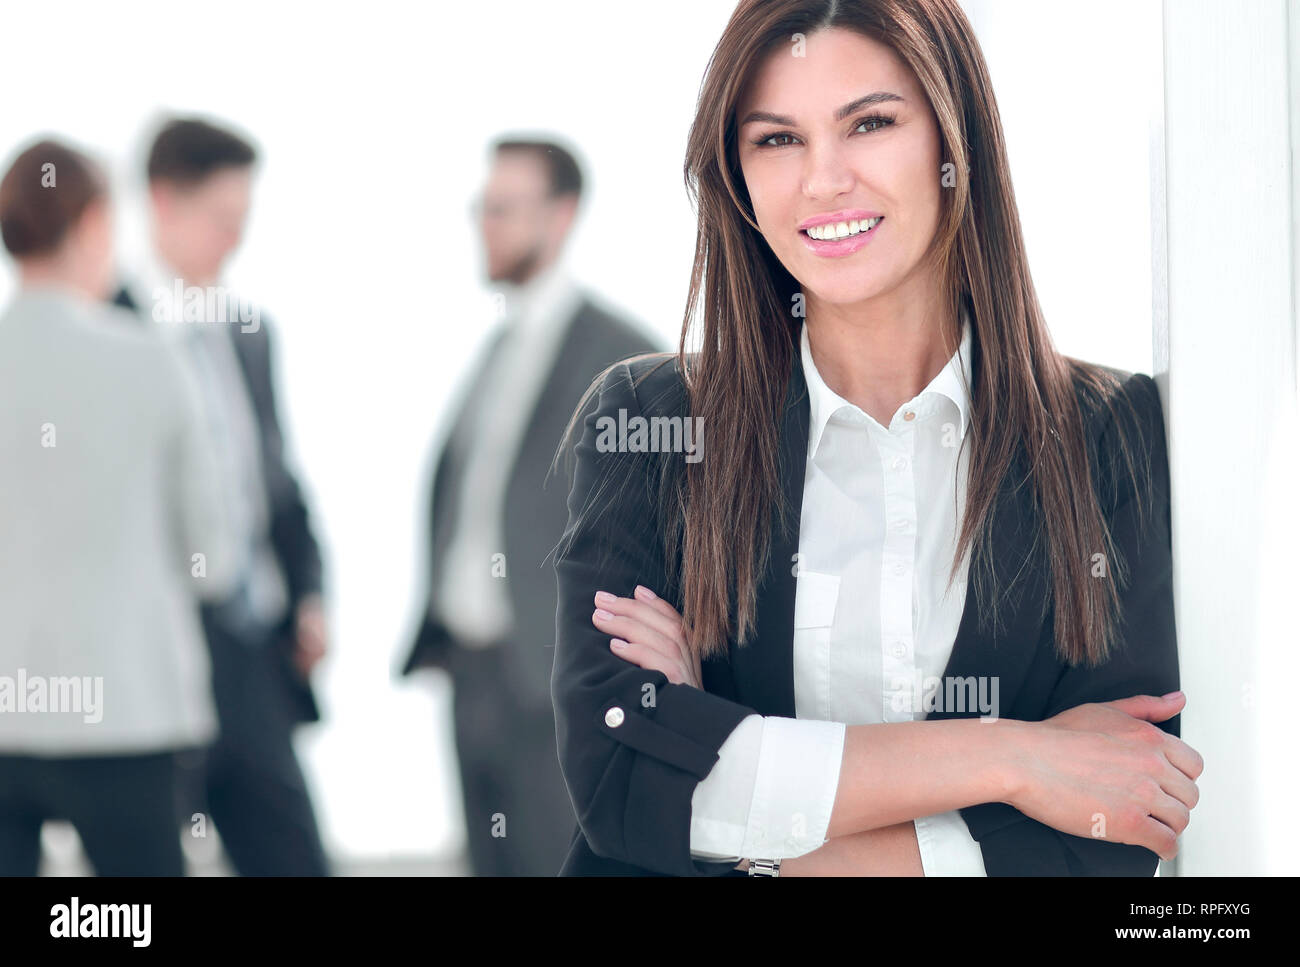 young business woman on blurred office background. Stock Photo